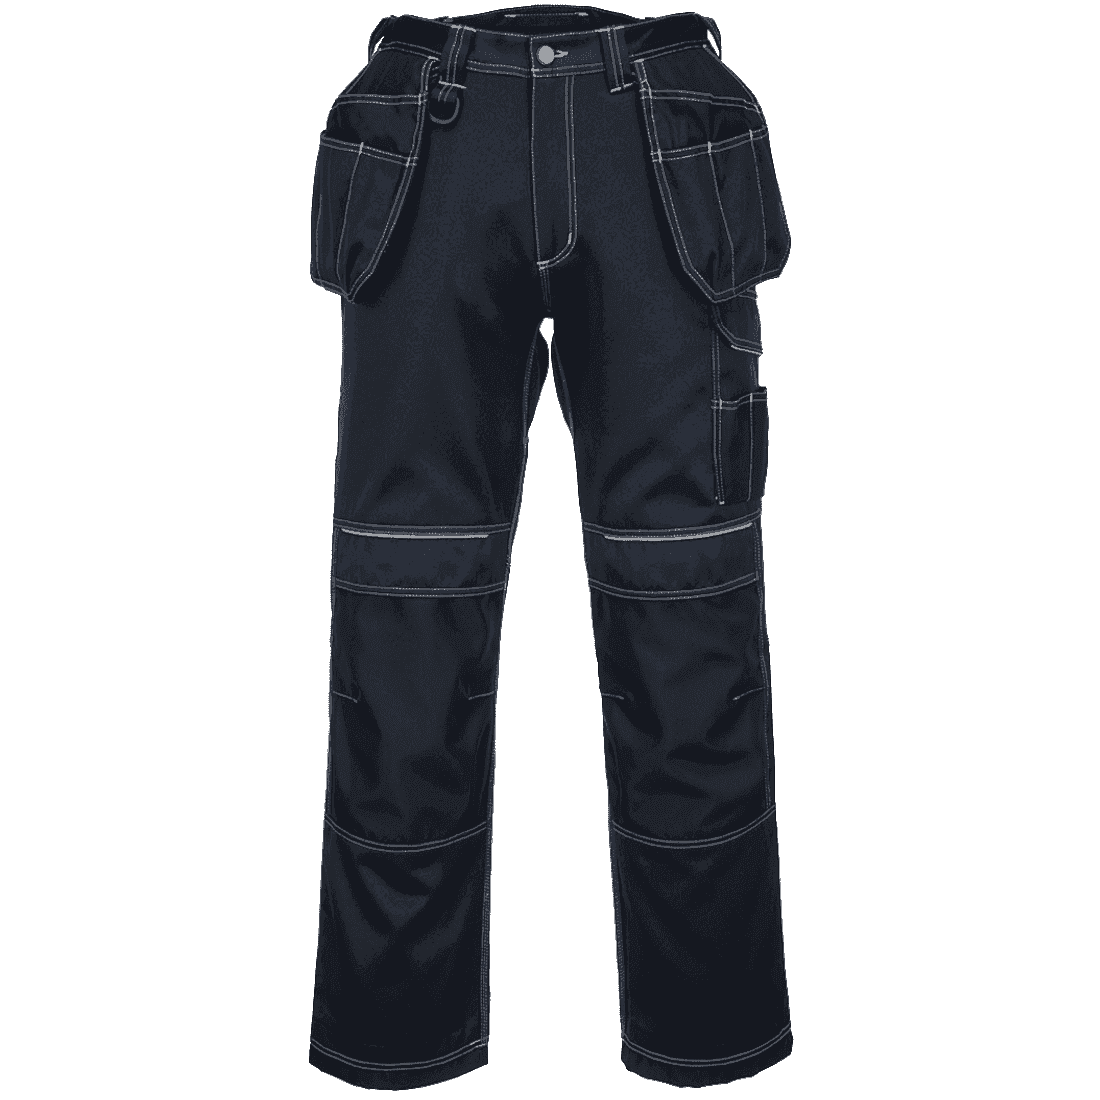 Holster Pocket Work Trousers T602 PW3 Navy/Black